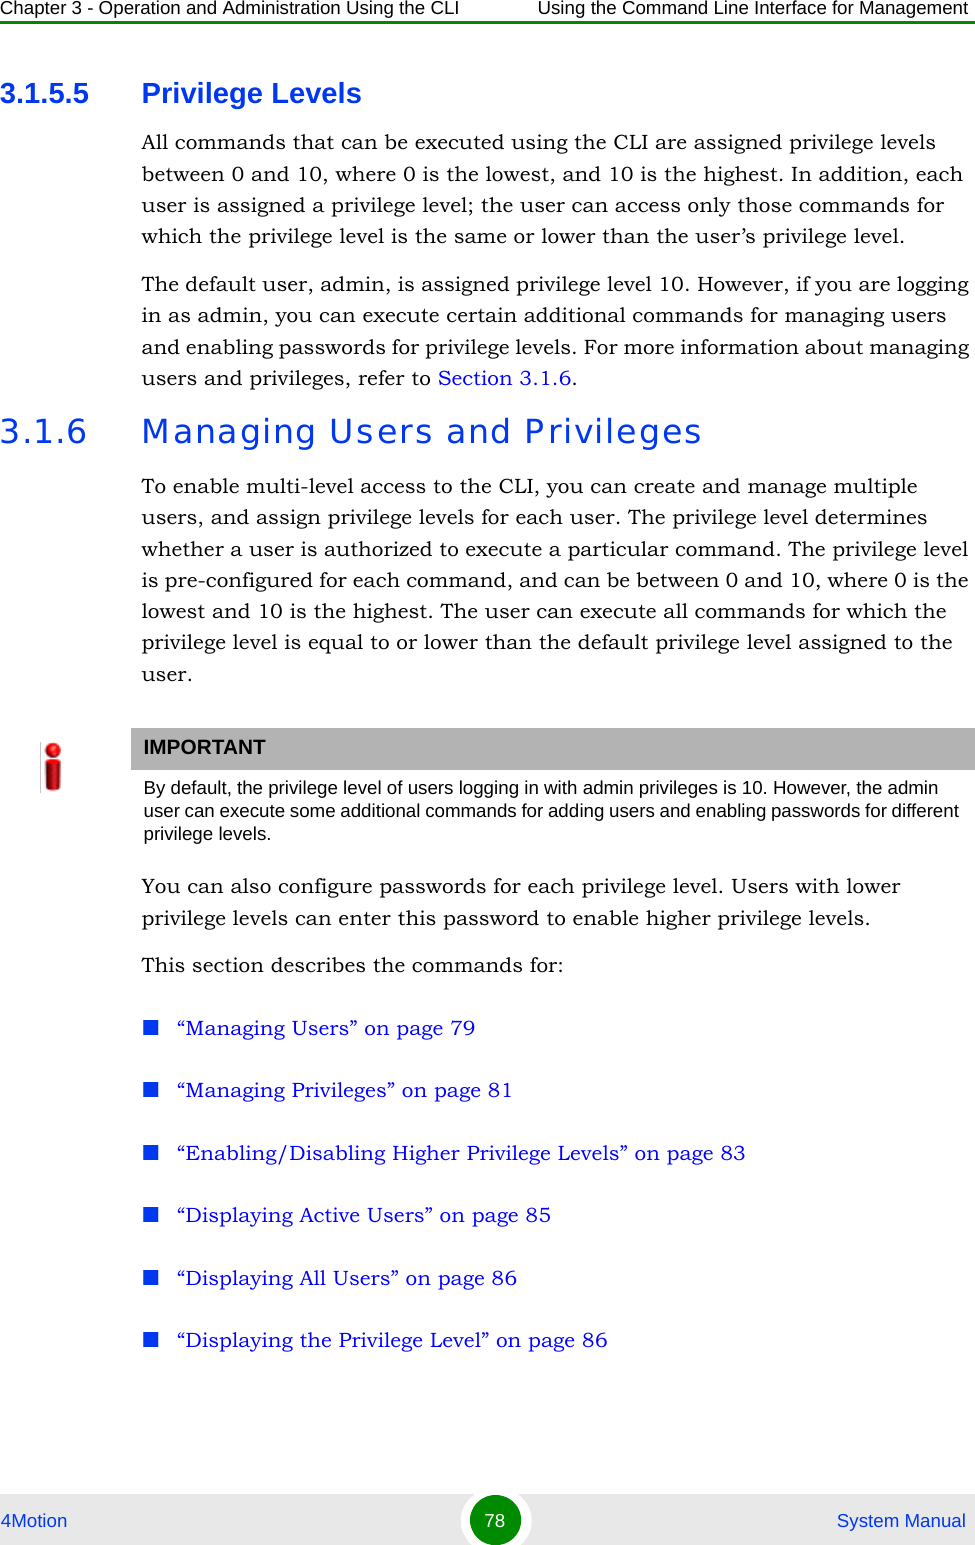 Chapter 3 - Operation and Administration Using the CLI Using the Command Line Interface for Management4Motion 78  System Manual3.1.5.5 Privilege LevelsAll commands that can be executed using the CLI are assigned privilege levels between 0 and 10, where 0 is the lowest, and 10 is the highest. In addition, each user is assigned a privilege level; the user can access only those commands for which the privilege level is the same or lower than the user’s privilege level. The default user, admin, is assigned privilege level 10. However, if you are logging in as admin, you can execute certain additional commands for managing users and enabling passwords for privilege levels. For more information about managing users and privileges, refer to Section 3.1.6.3.1.6 Managing Users and PrivilegesTo enable multi-level access to the CLI, you can create and manage multiple users, and assign privilege levels for each user. The privilege level determines whether a user is authorized to execute a particular command. The privilege level is pre-configured for each command, and can be between 0 and 10, where 0 is the lowest and 10 is the highest. The user can execute all commands for which the privilege level is equal to or lower than the default privilege level assigned to the user.You can also configure passwords for each privilege level. Users with lower privilege levels can enter this password to enable higher privilege levels.This section describes the commands for:“Managing Users” on page 79“Managing Privileges” on page 81“Enabling/Disabling Higher Privilege Levels” on page 83“Displaying Active Users” on page 85“Displaying All Users” on page 86“Displaying the Privilege Level” on page 86IMPORTANTBy default, the privilege level of users logging in with admin privileges is 10. However, the admin user can execute some additional commands for adding users and enabling passwords for different privilege levels. 